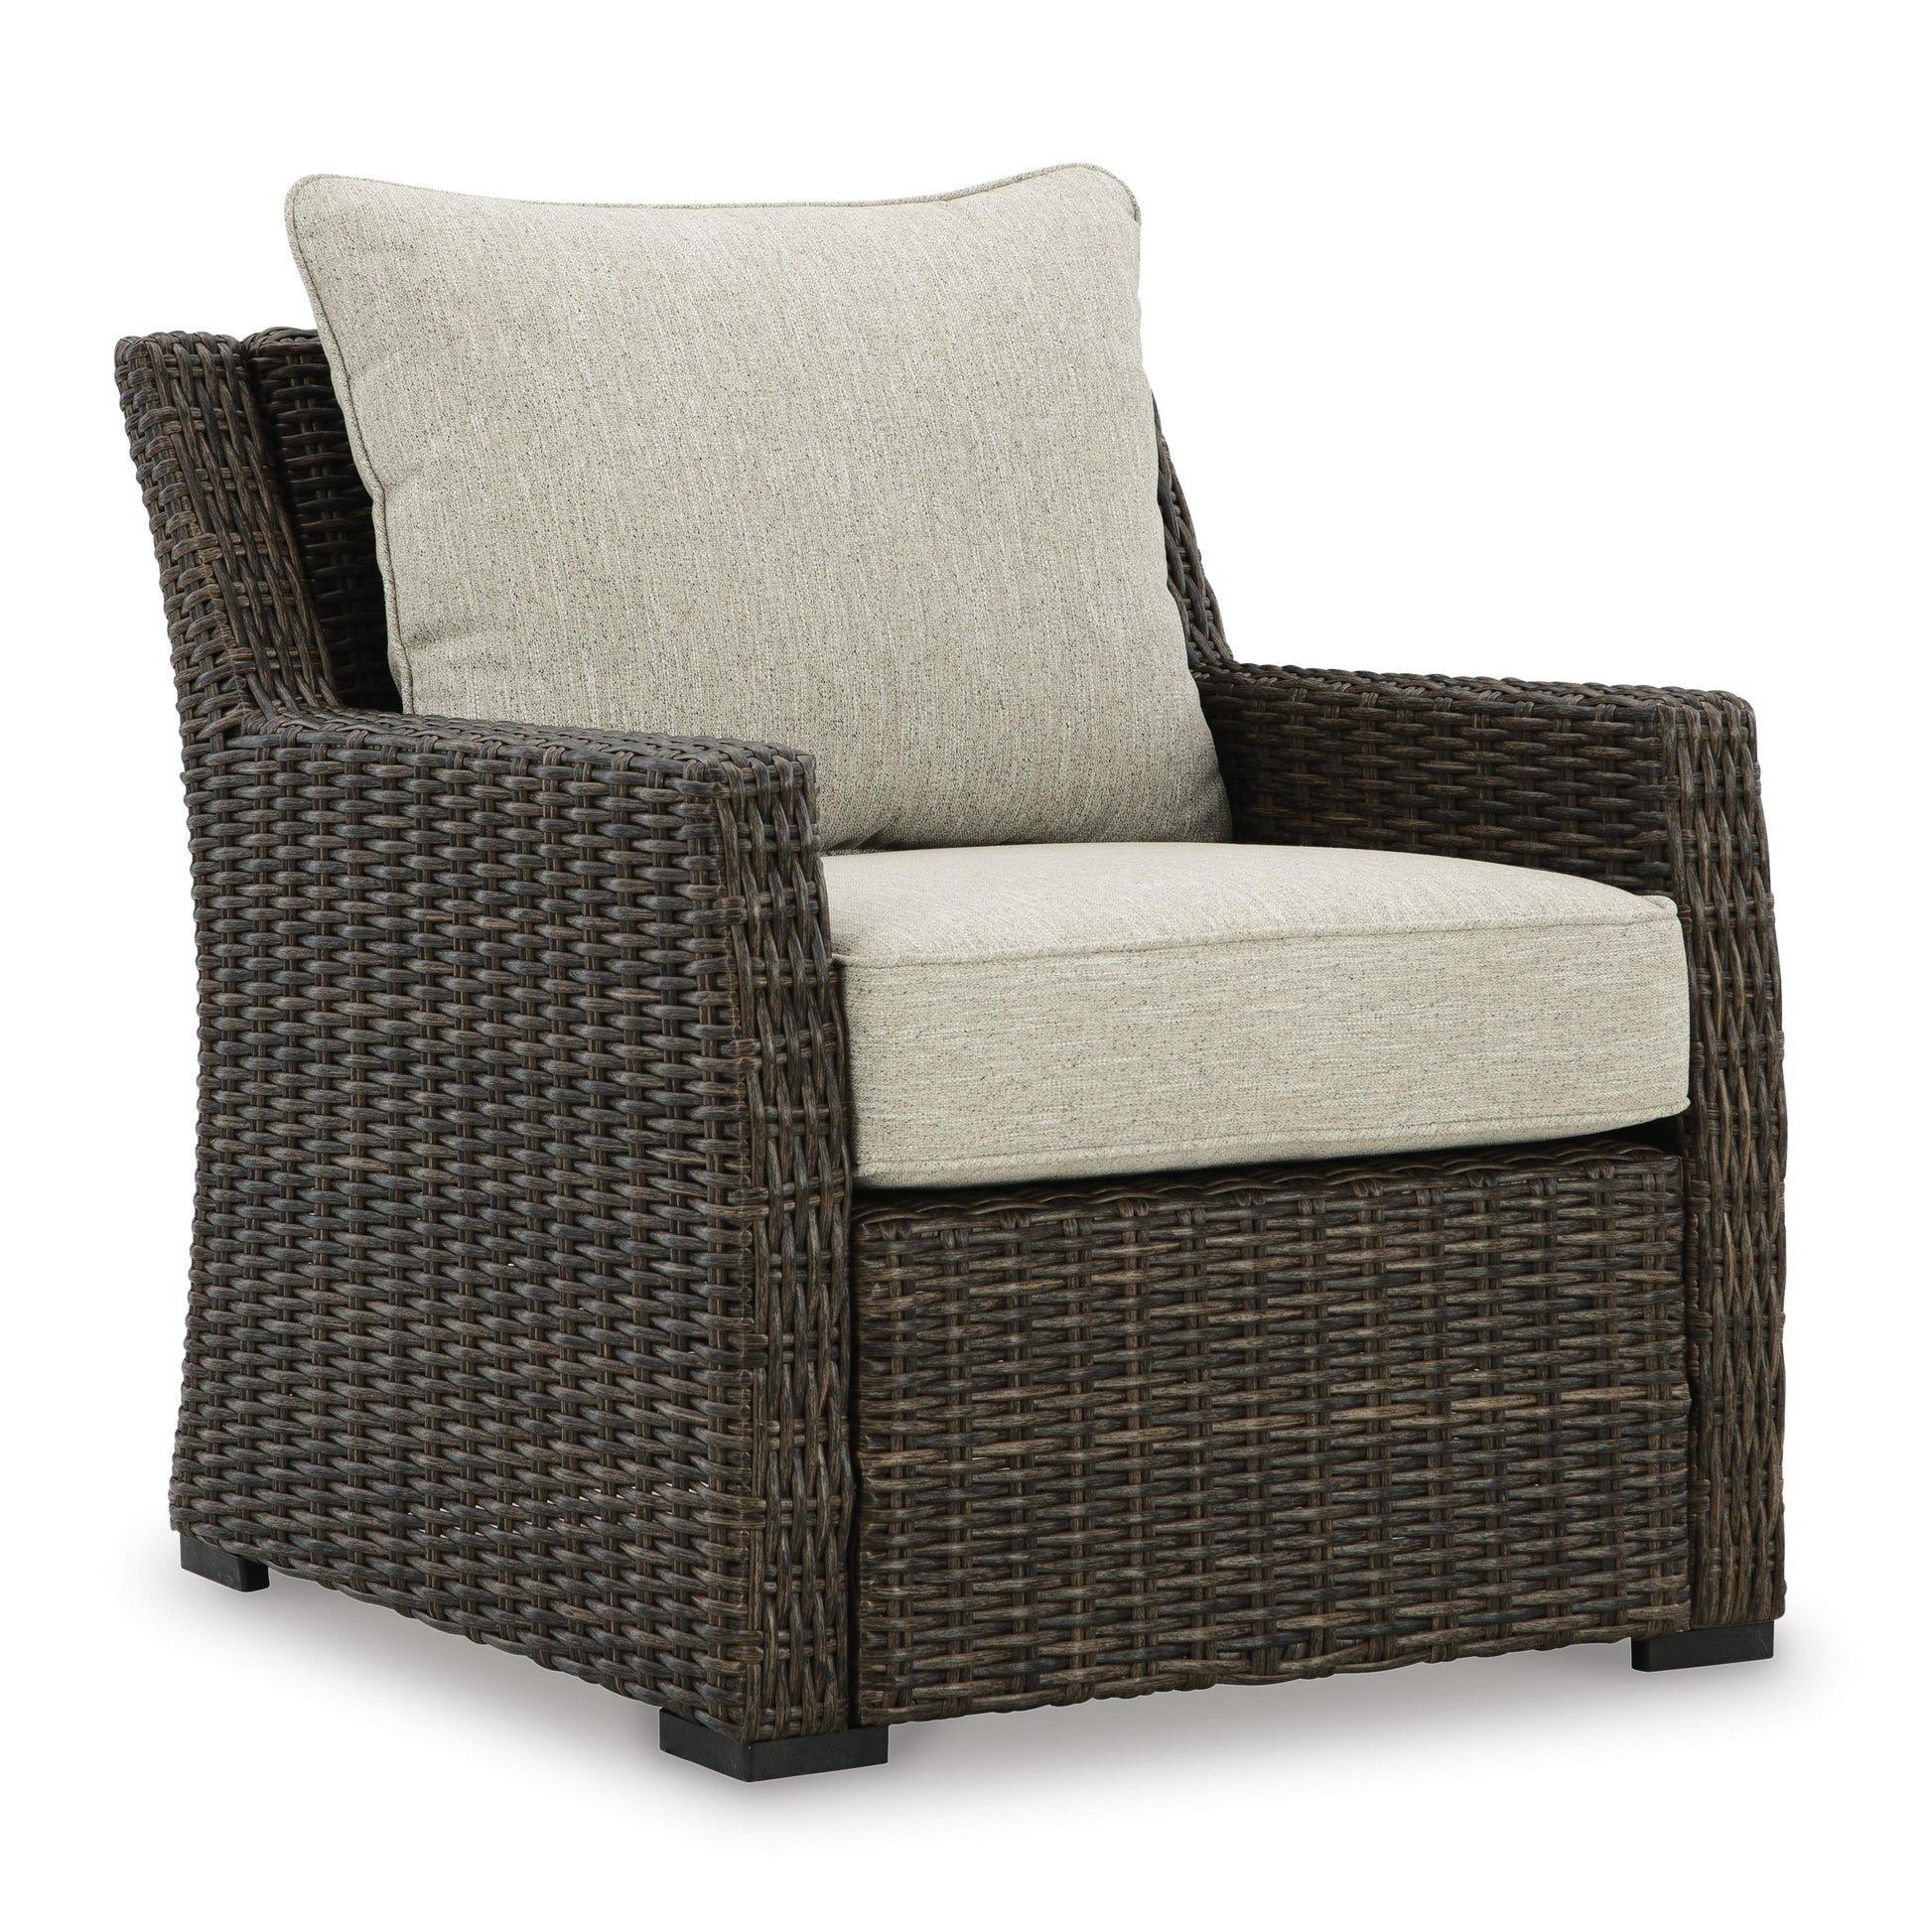 Signature Design by Ashley Outdoor Seating Lounge Chairs P465-820 IMAGE 1